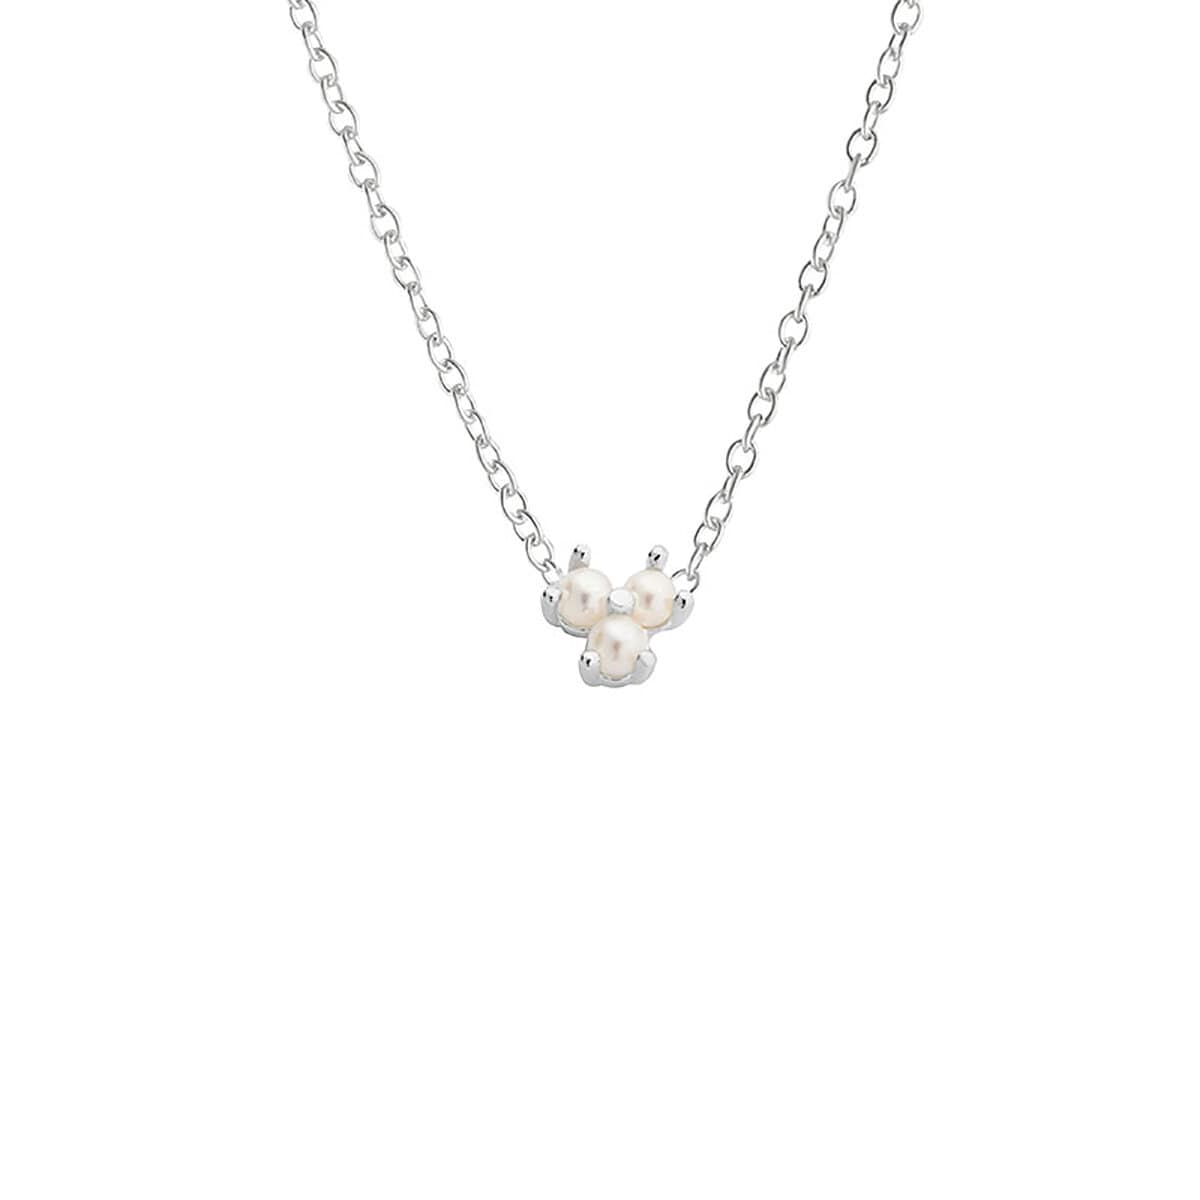 Petite Star pearl necklace